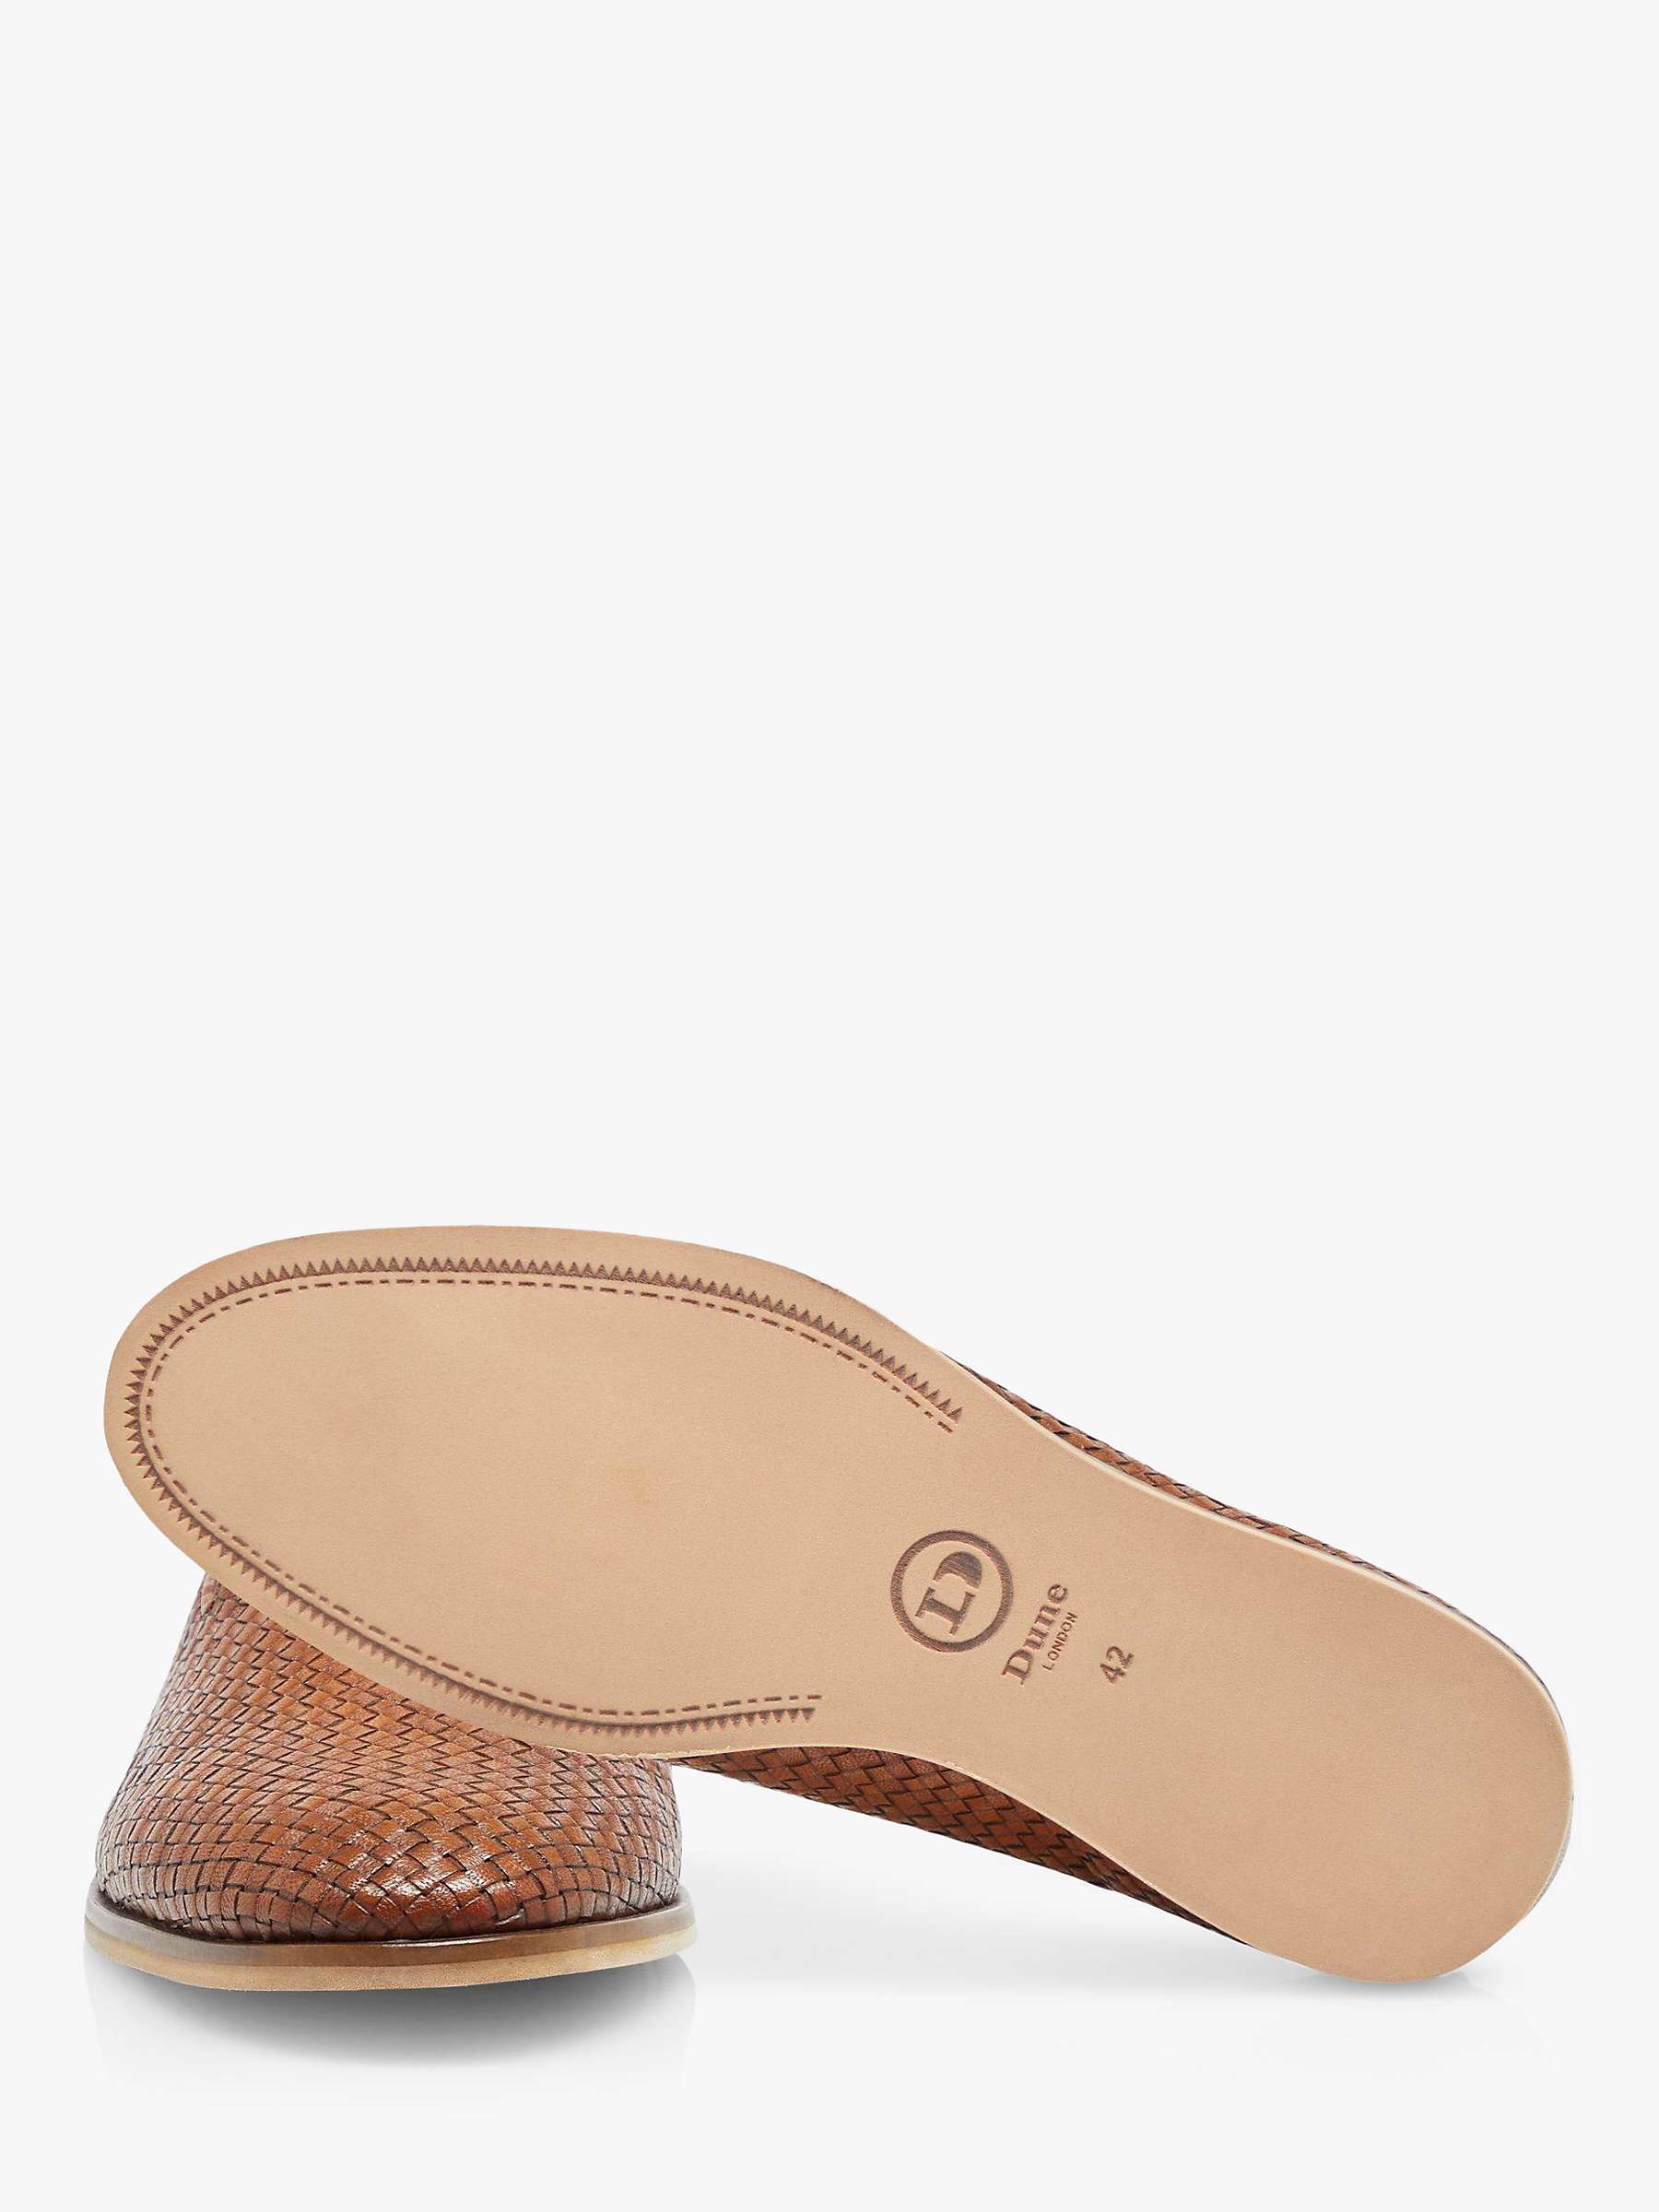 Buy Dune Bases Woven Leather Loafers, Brown Online at johnlewis.com